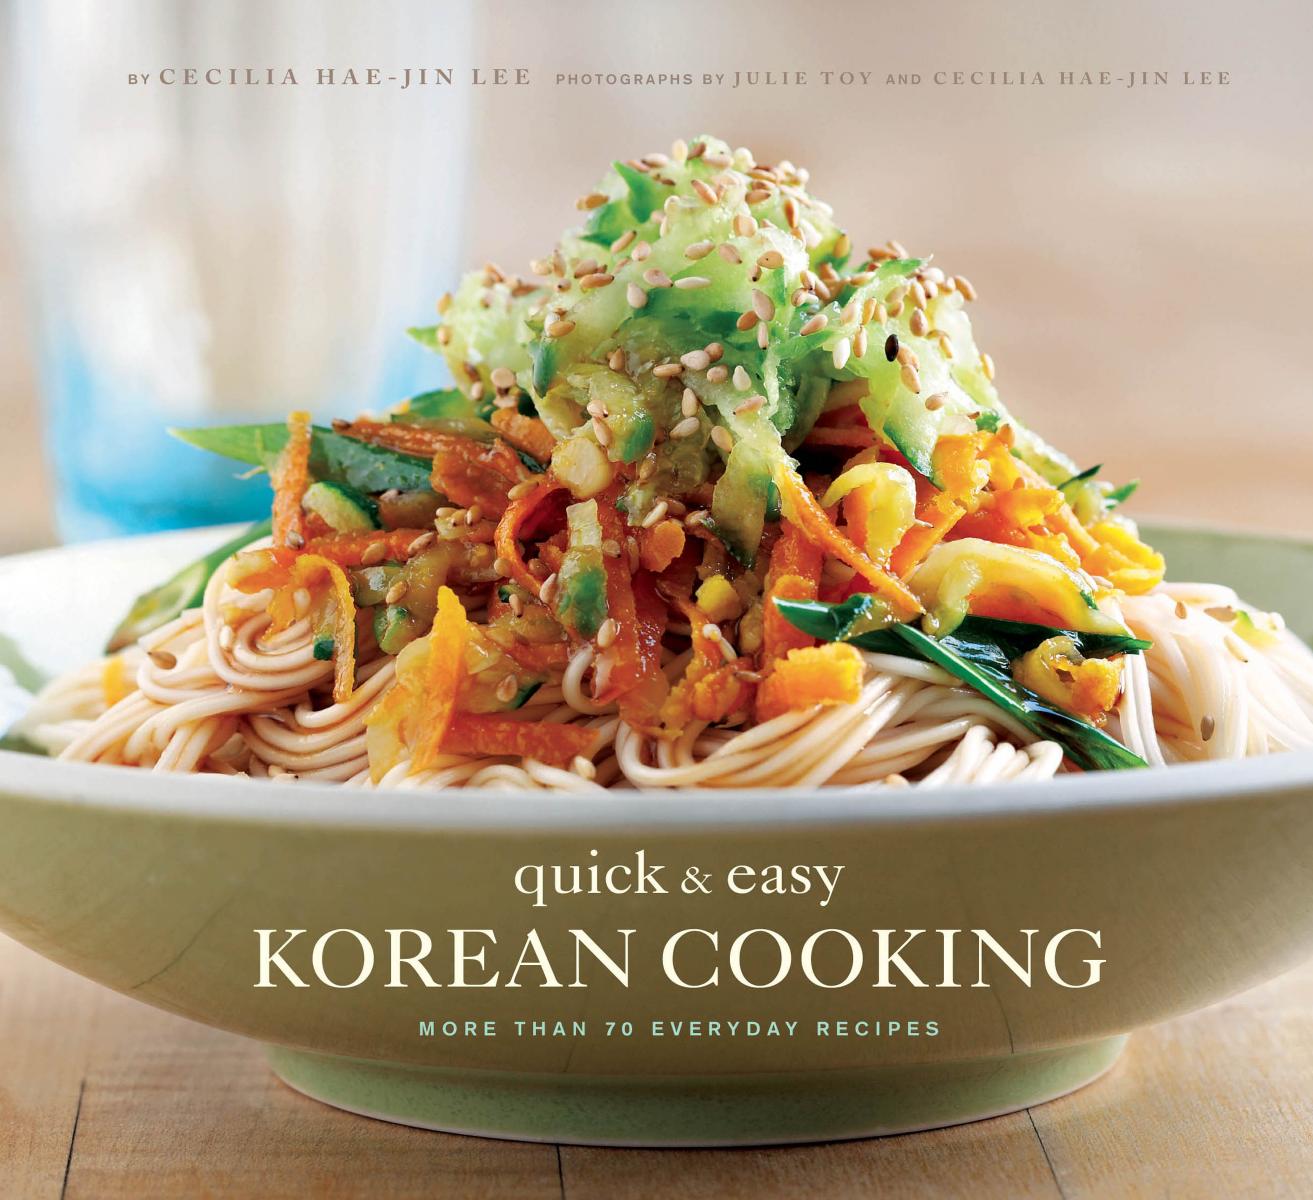 Quick & Easy Korean Cooking by Cecilia Hae-Jin Lee